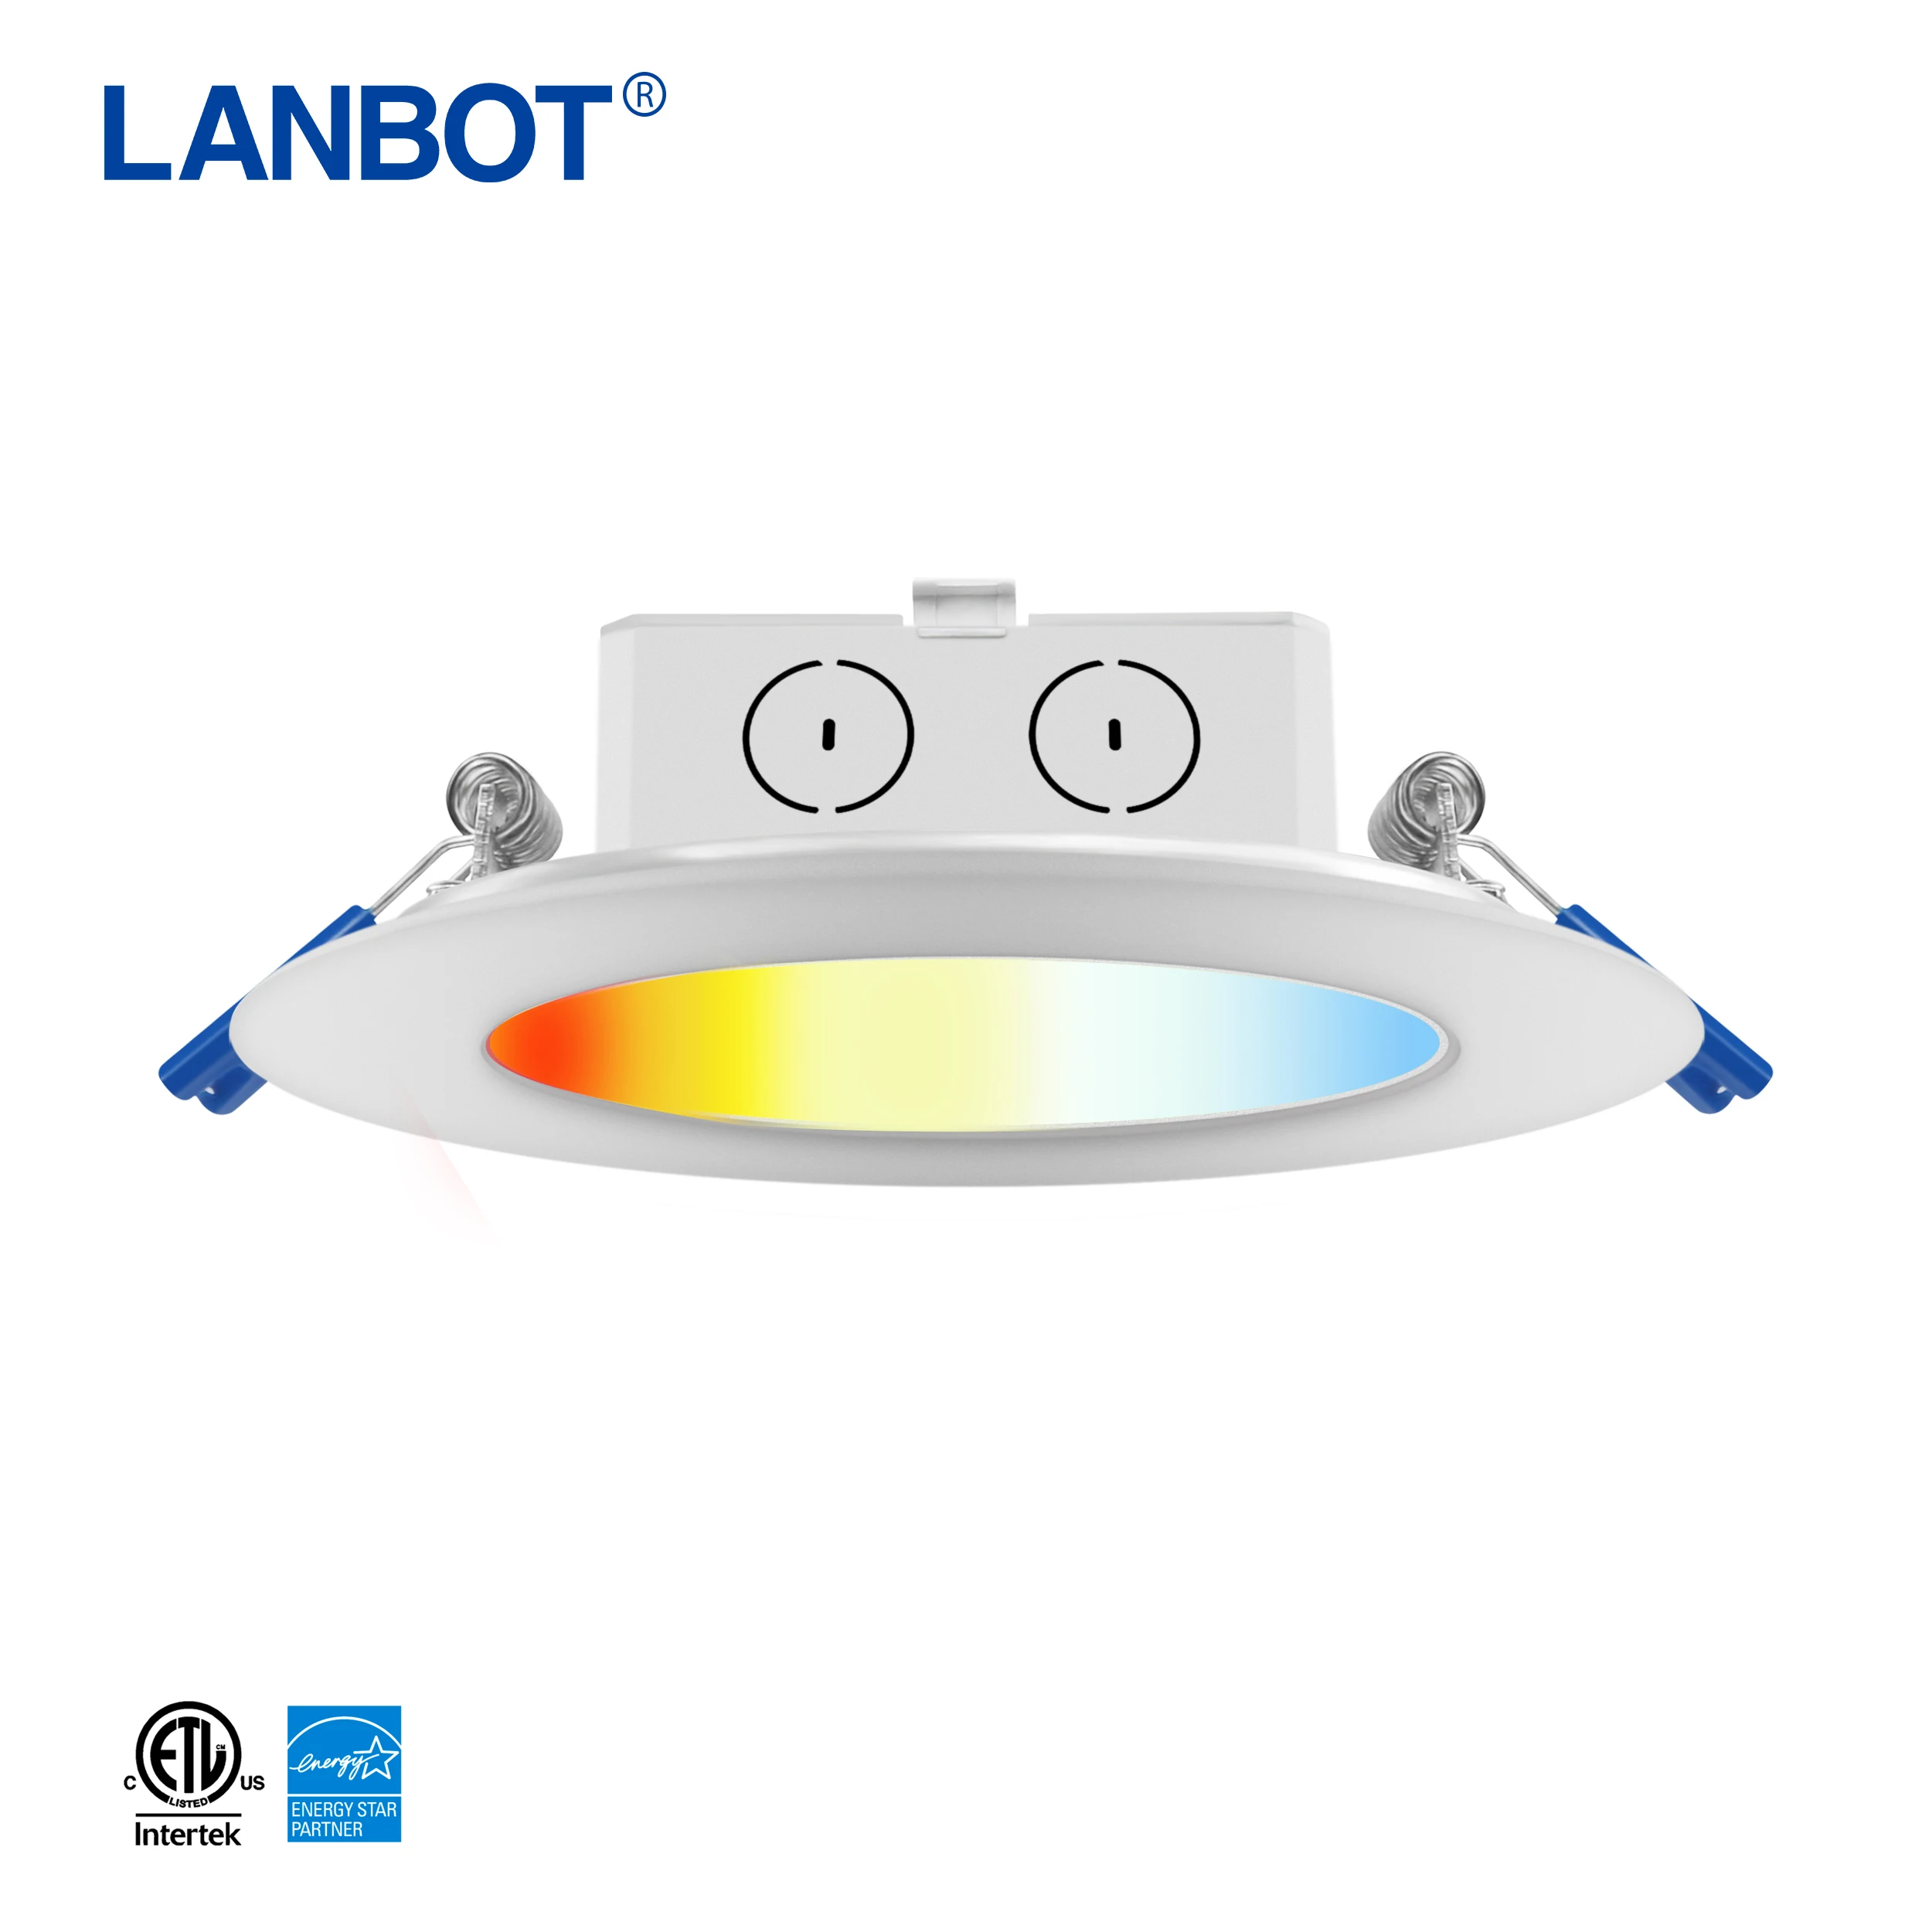 LANBOT 4 Inch LED Downlight with Smooth Trim Retrofit LED Recessed Lighting 5CCT changeable downlight